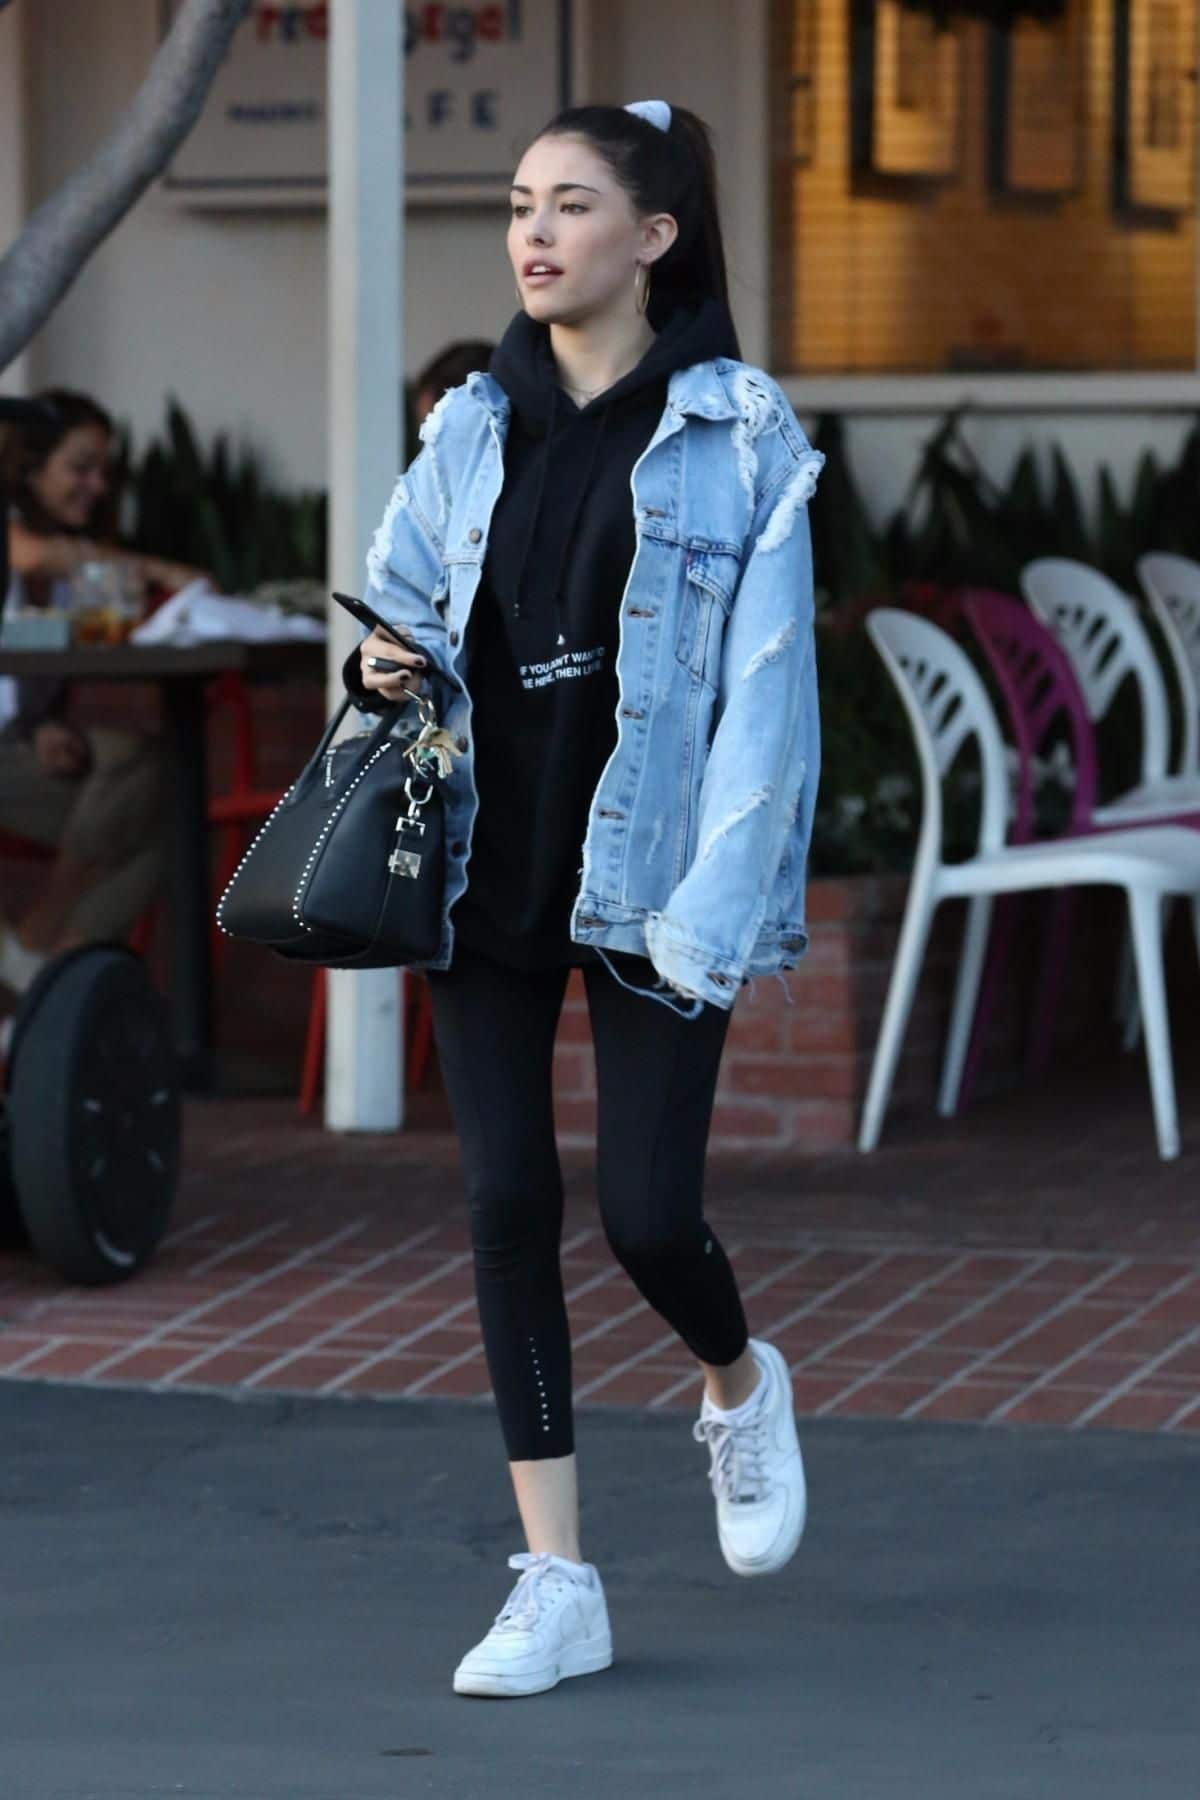 Madison Beer in Nike Air Force 1 outfit with jean jacket